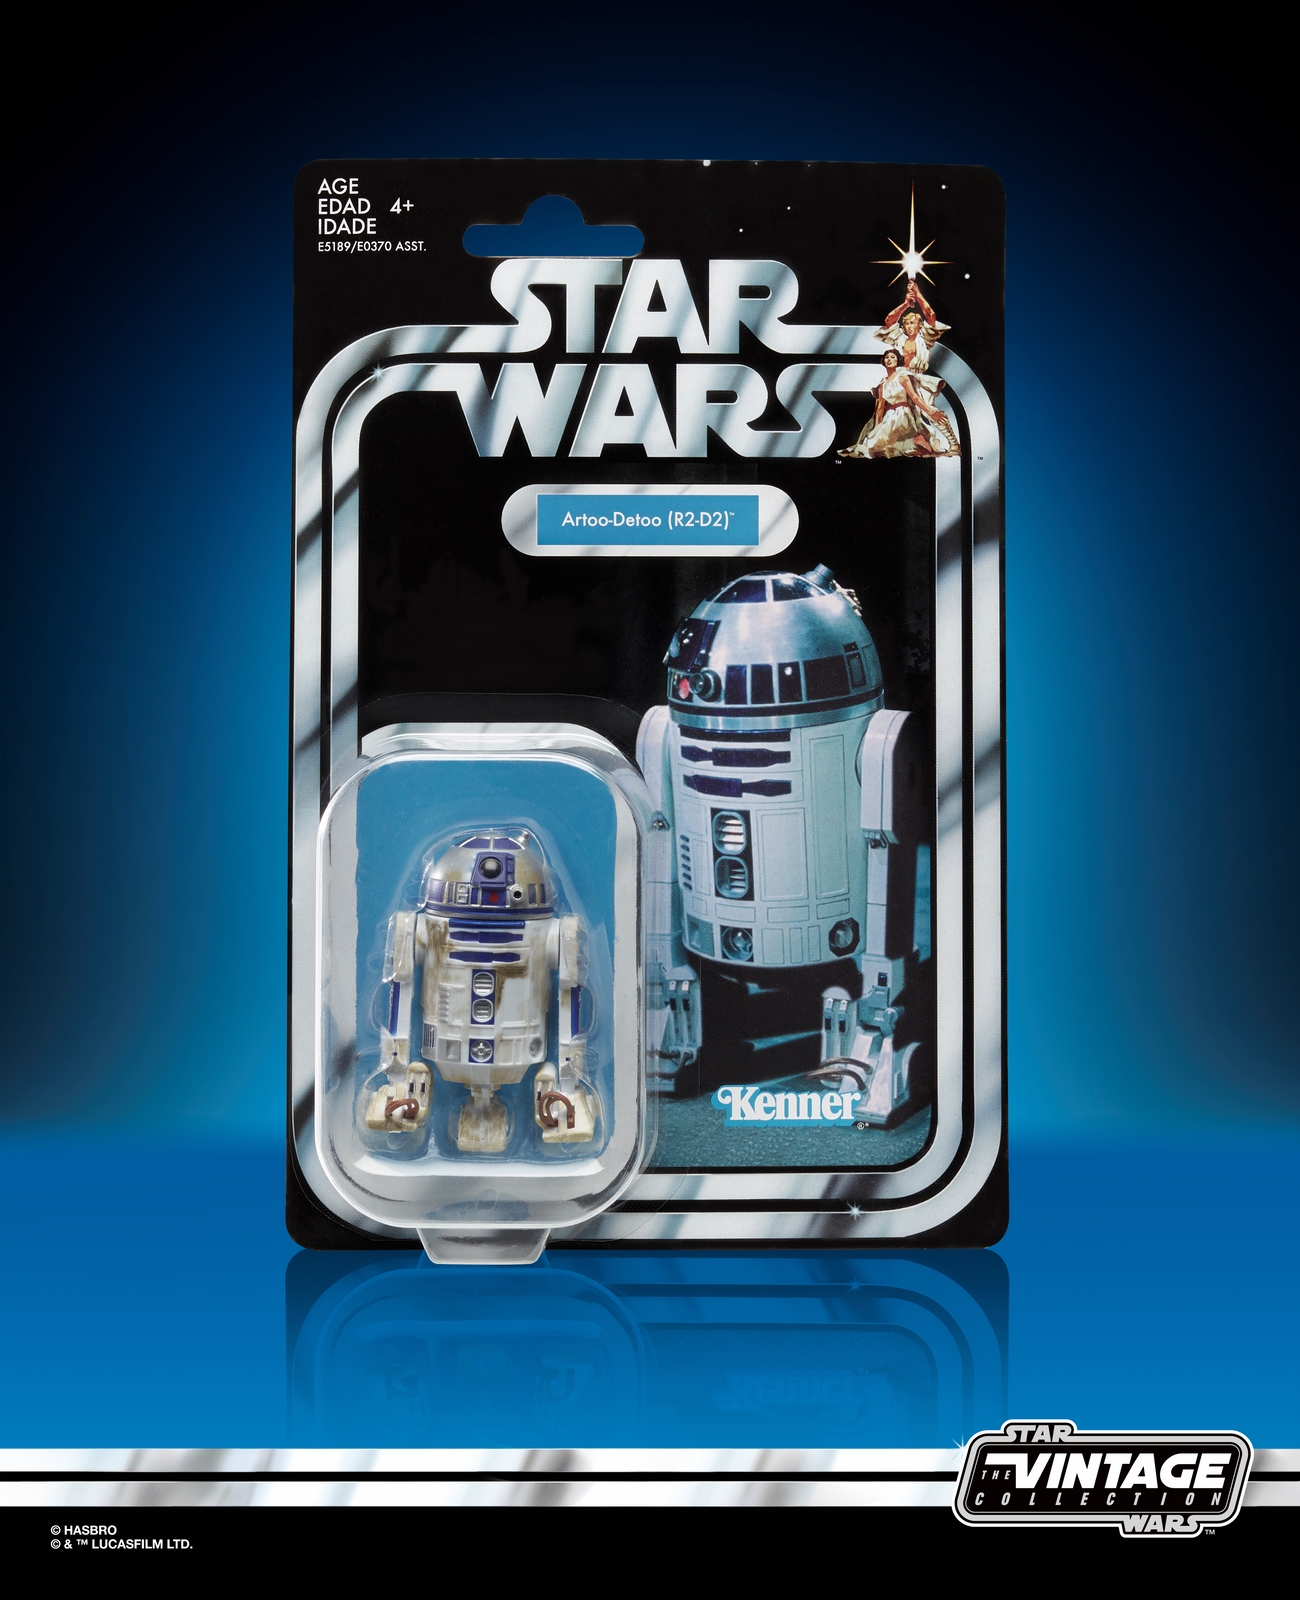 STAR WARS THE VINTAGE COLLECTION 3.75-INCH Figure Assortment - R2D2 (in pck 1).jpg